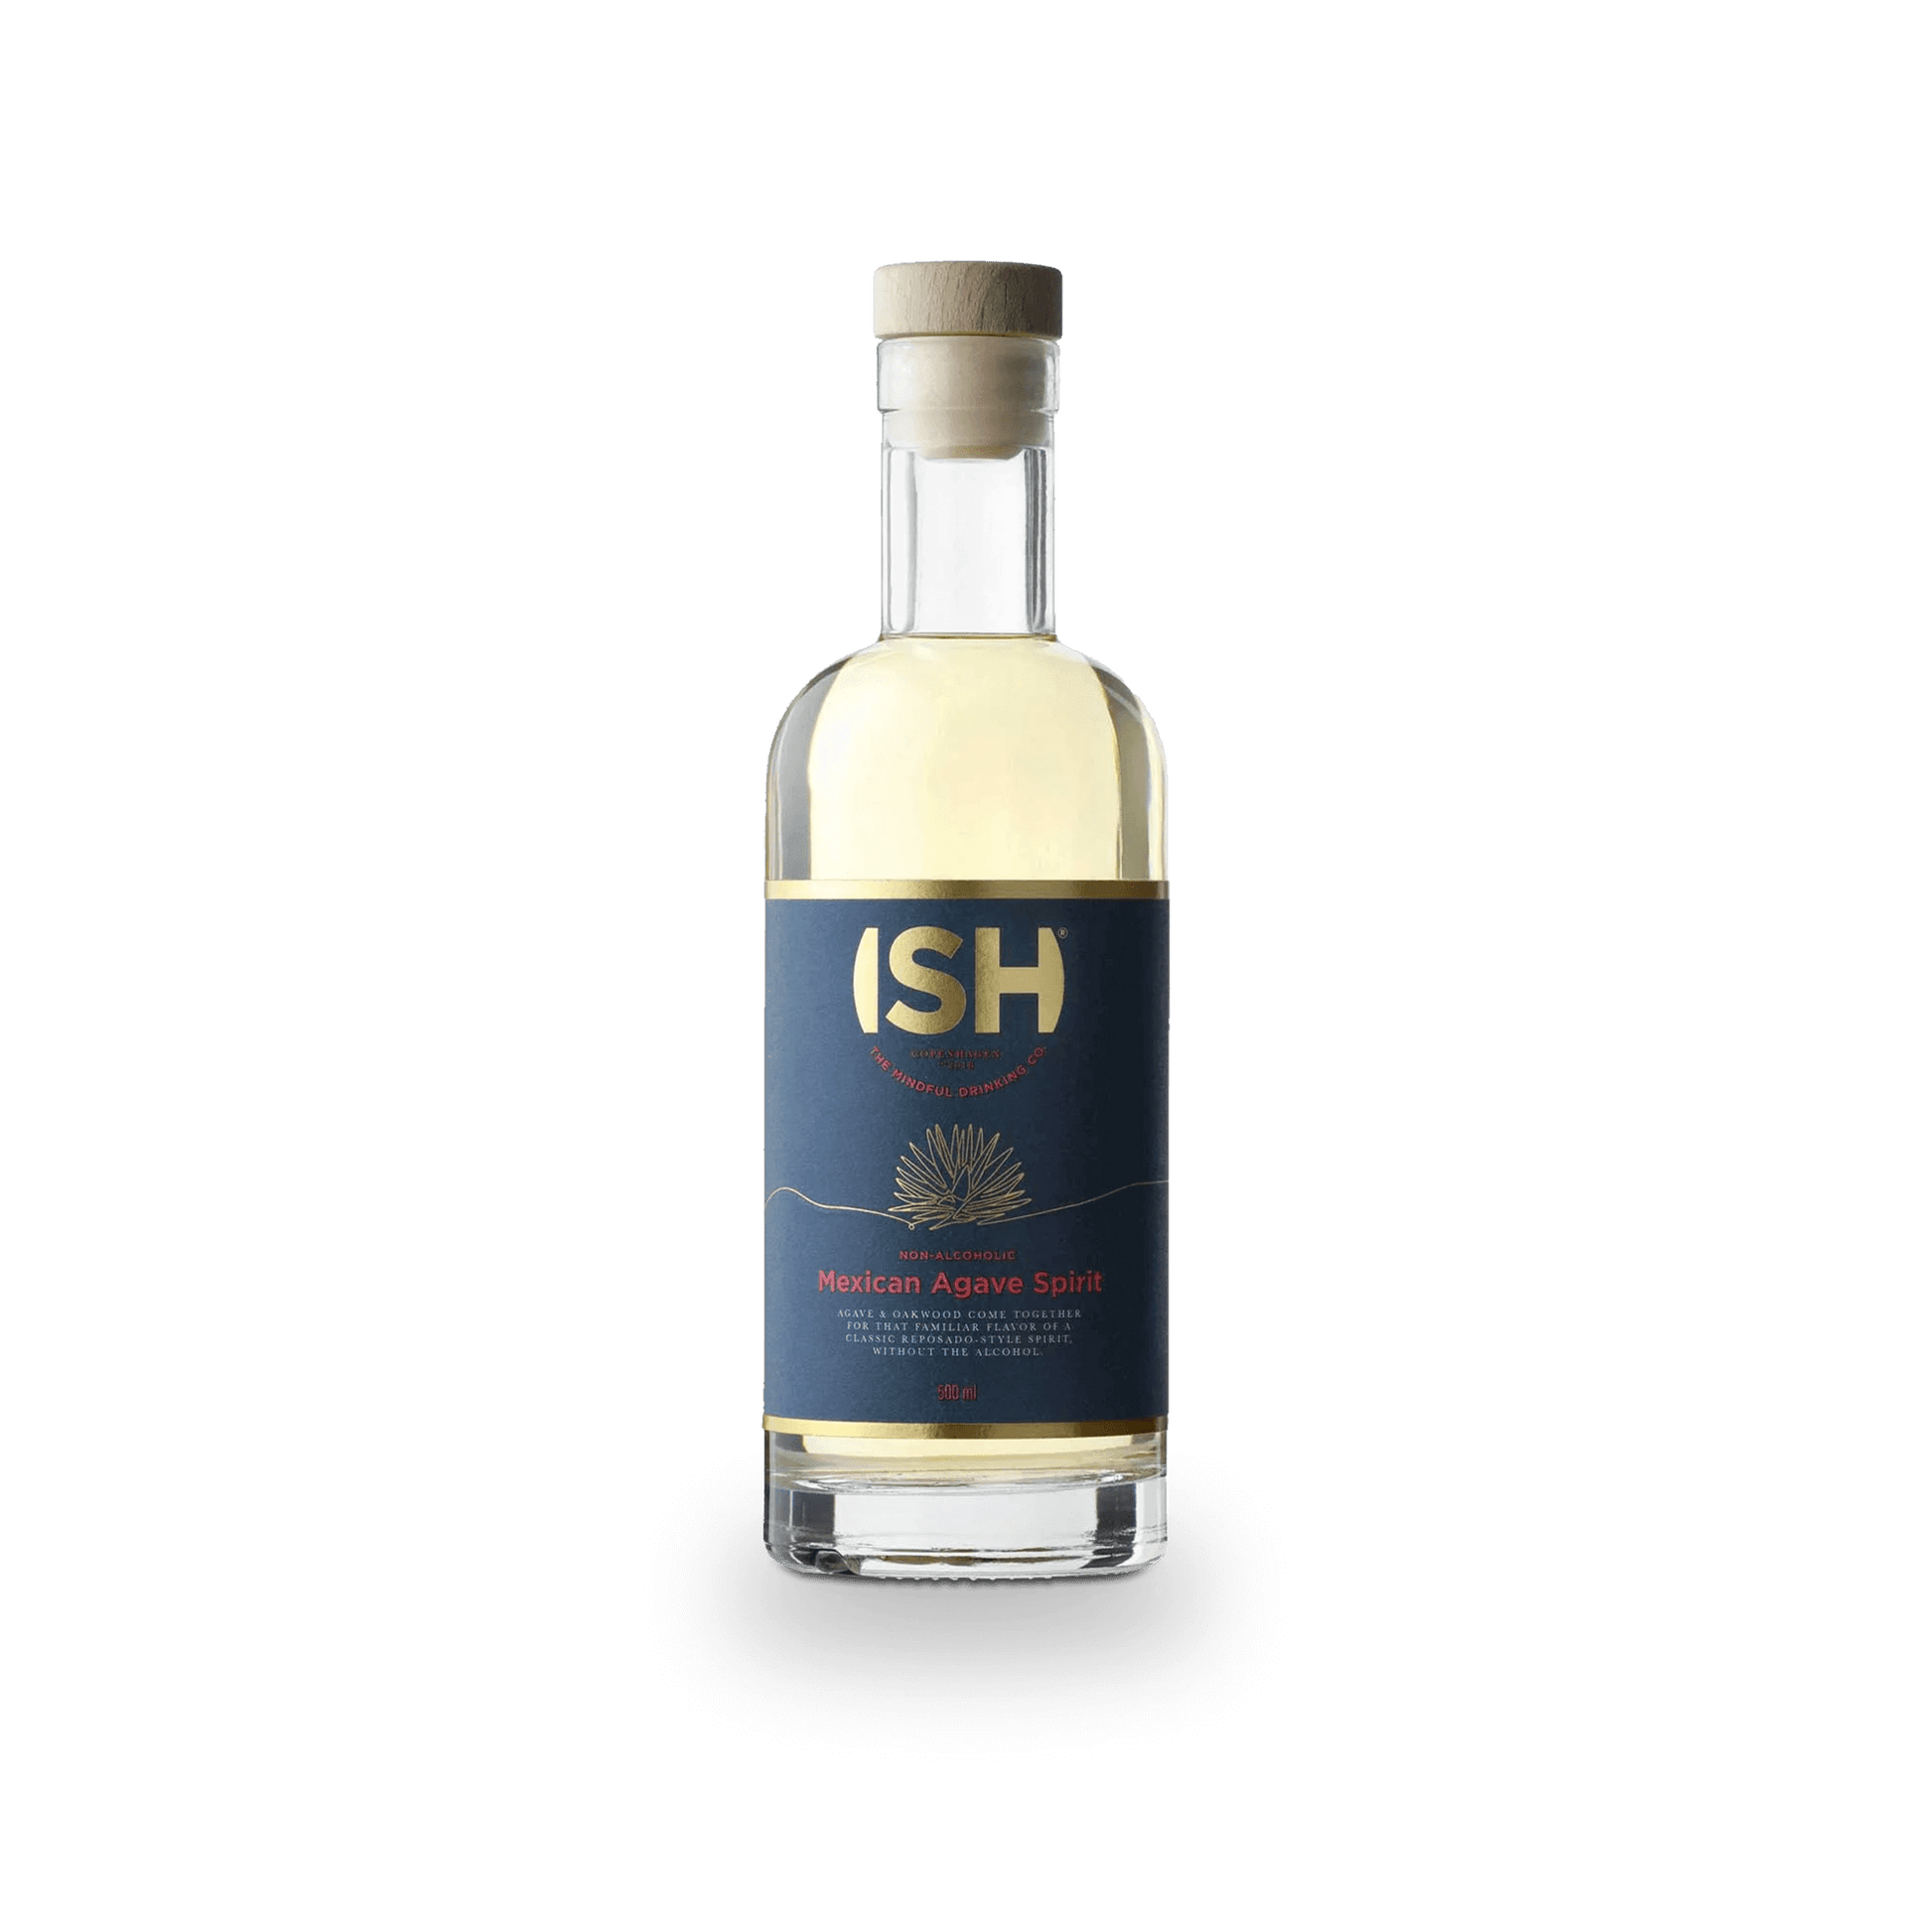 ISH Non-alcoholic Tequila, Mexican Agave Spirit Bottle